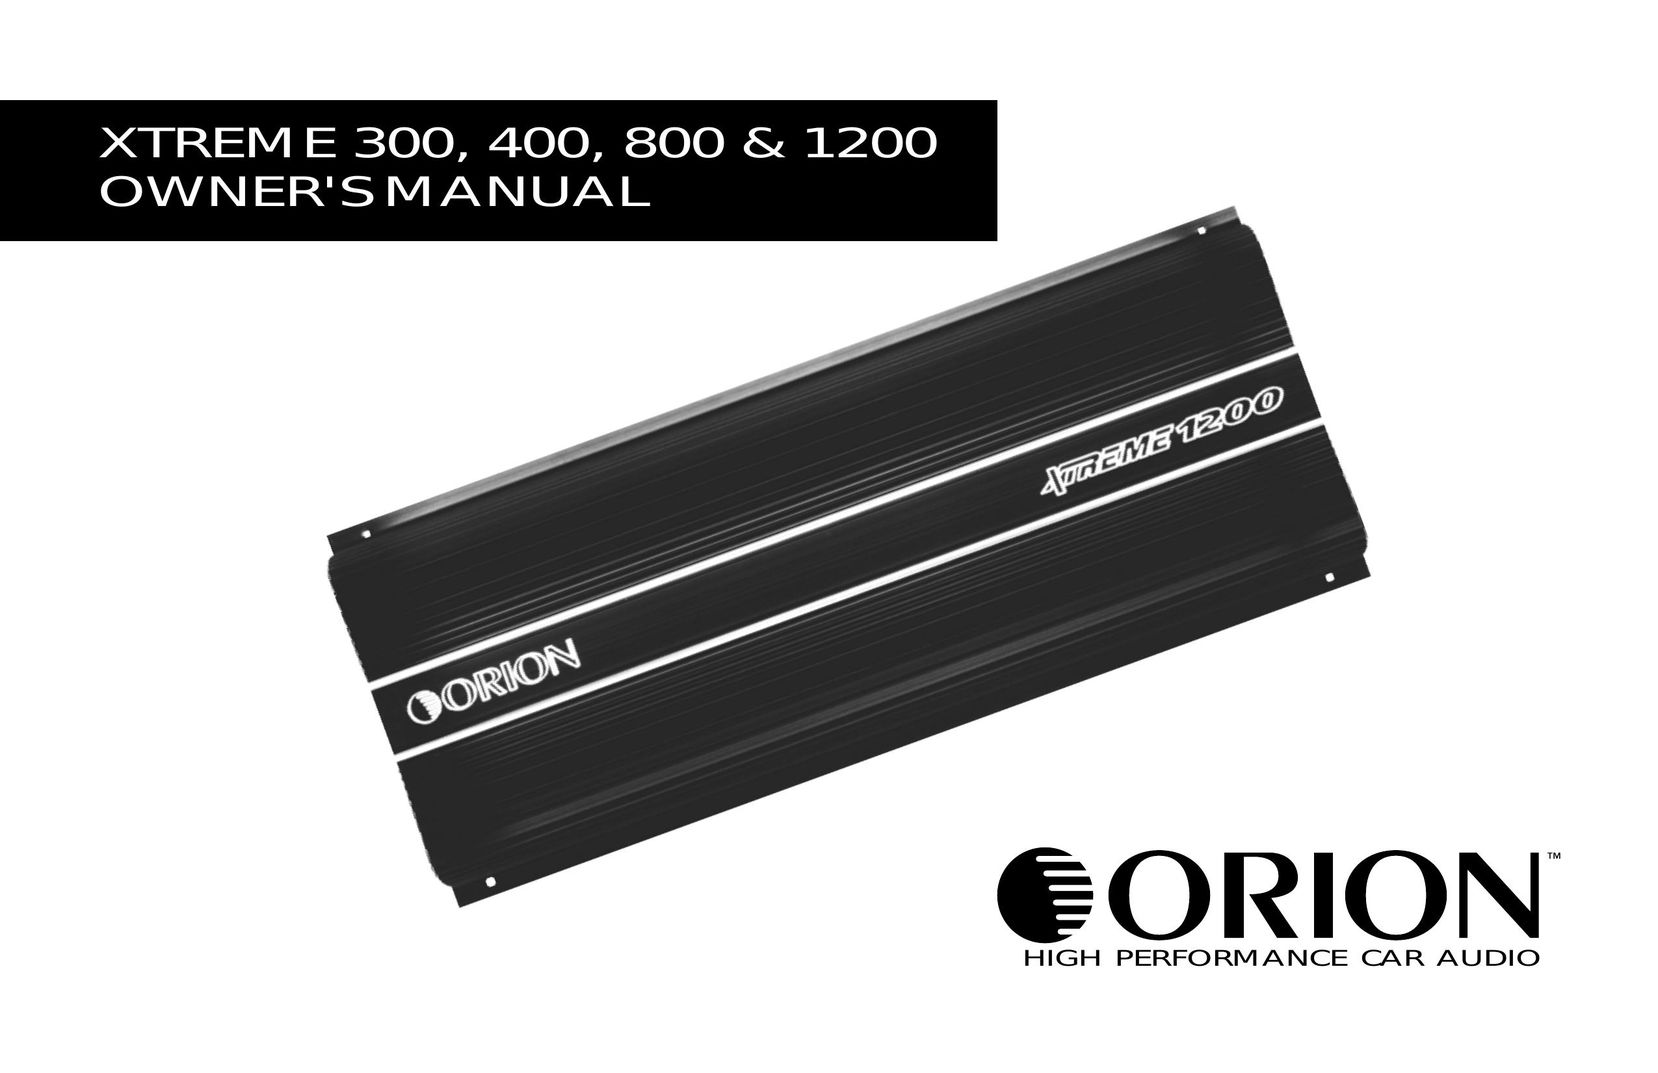 Orion Car Audio XTREME 1200 Car Stereo System User Manual